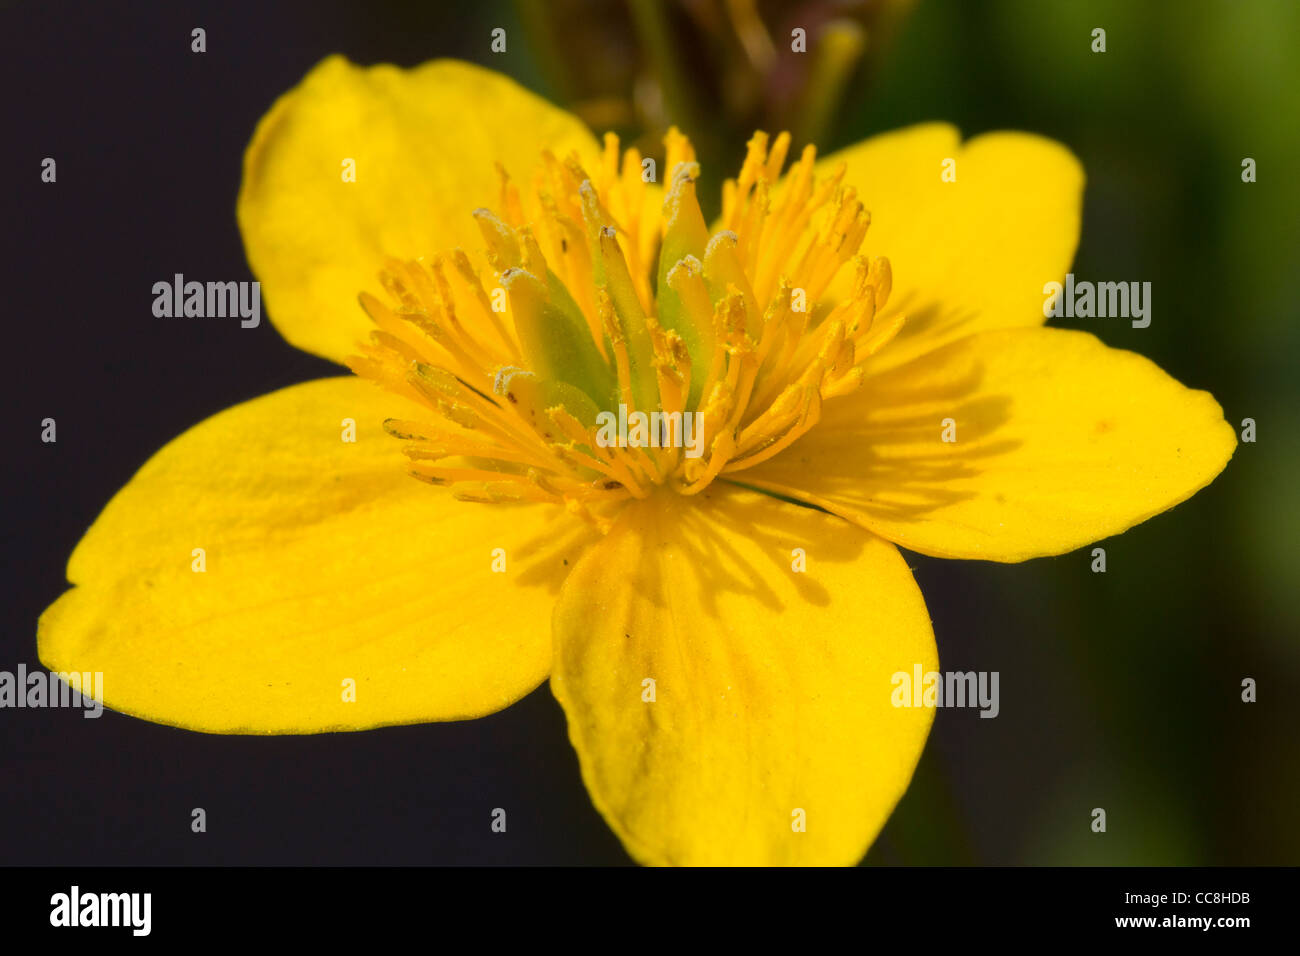 St John's wort is the plant species Hypericum perforatum, and is also known as Tipton's weed, chase-devil, or Klamath weed. Stock Photo